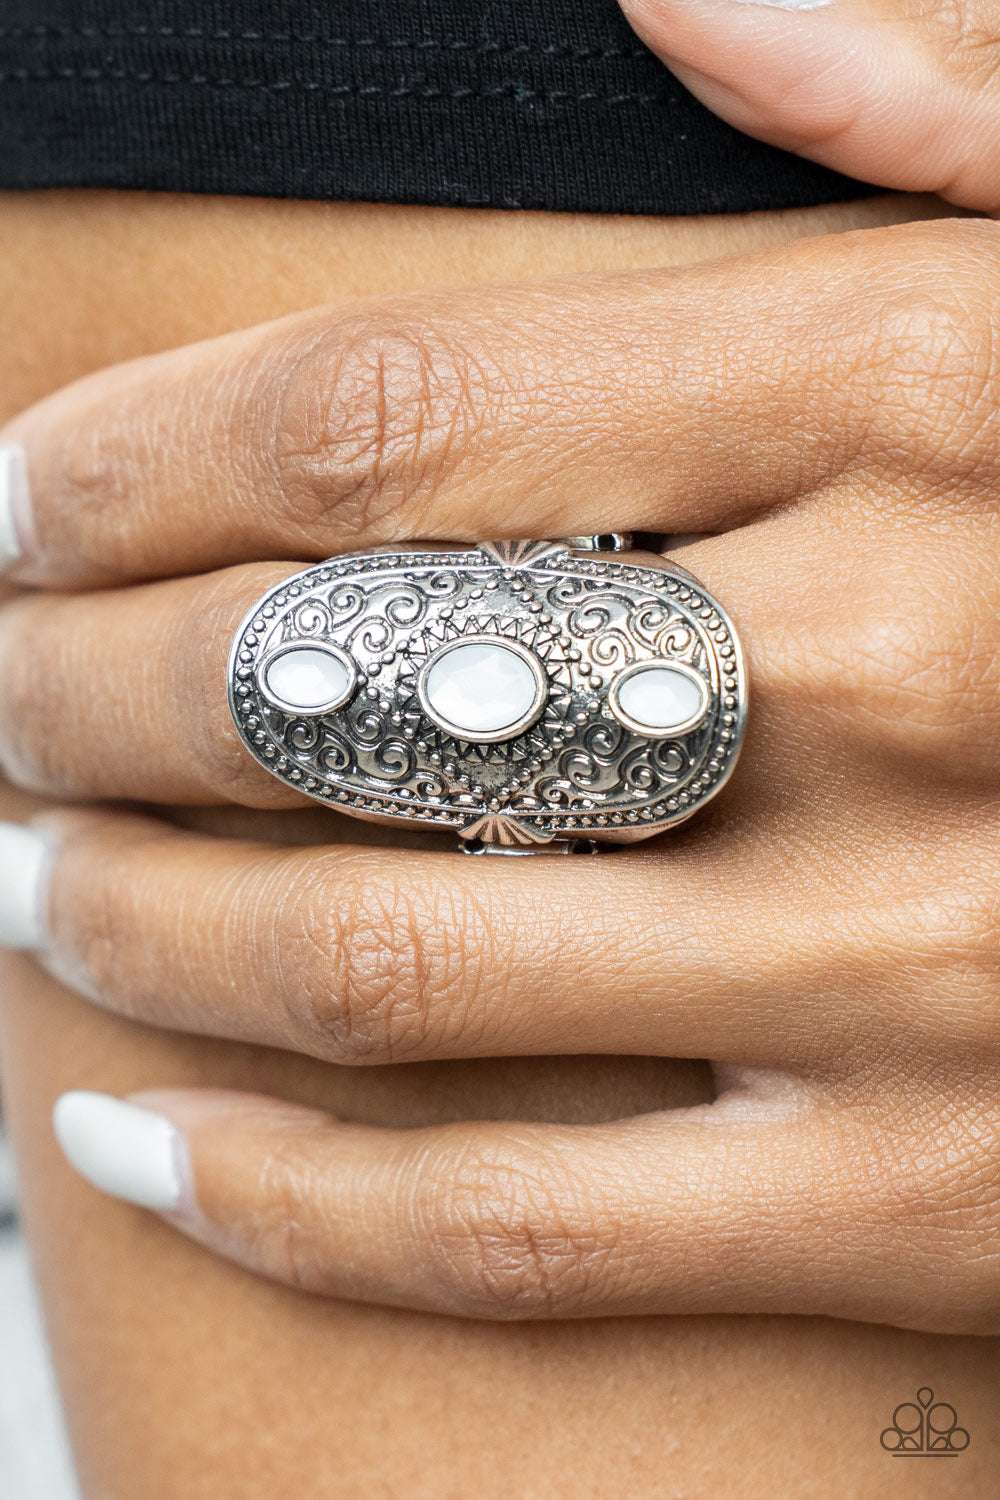 Promenade Paradise White Ring - Paparazzi Accessories  A trio of opaque white oval beads encased in silver frames graces the top of an elaborately decorated silver band. Dotted texture and floral designs create a statement-making finish atop the finger. Features a stretchy band for a flexible fit.  All Paparazzi Accessories are lead free and nickel free!  Sold as one individual ring.